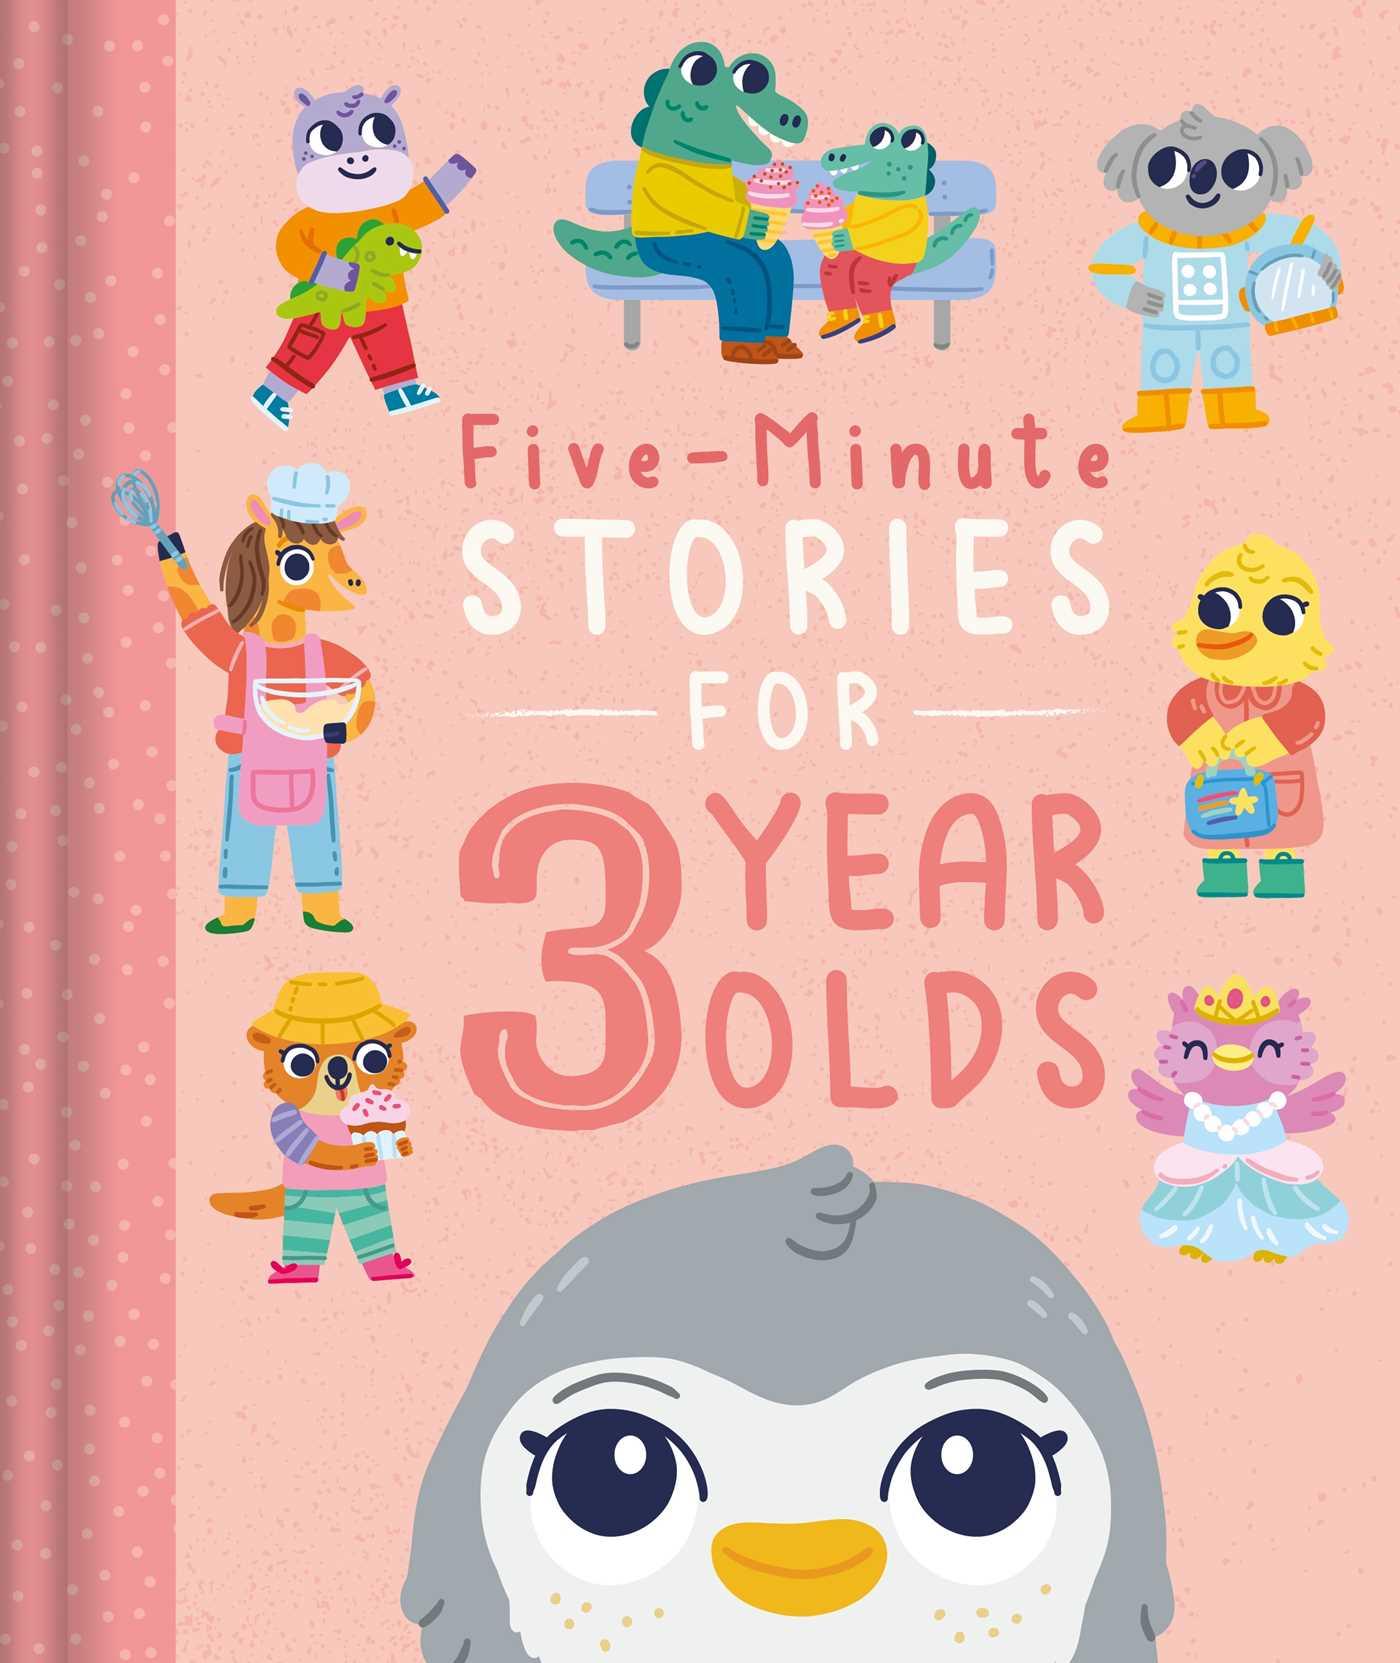 Kniha Five-Minute Stories for 3 Year Olds: With 7 Stories, 1 for Every Day of the Week Lizzy Doyle